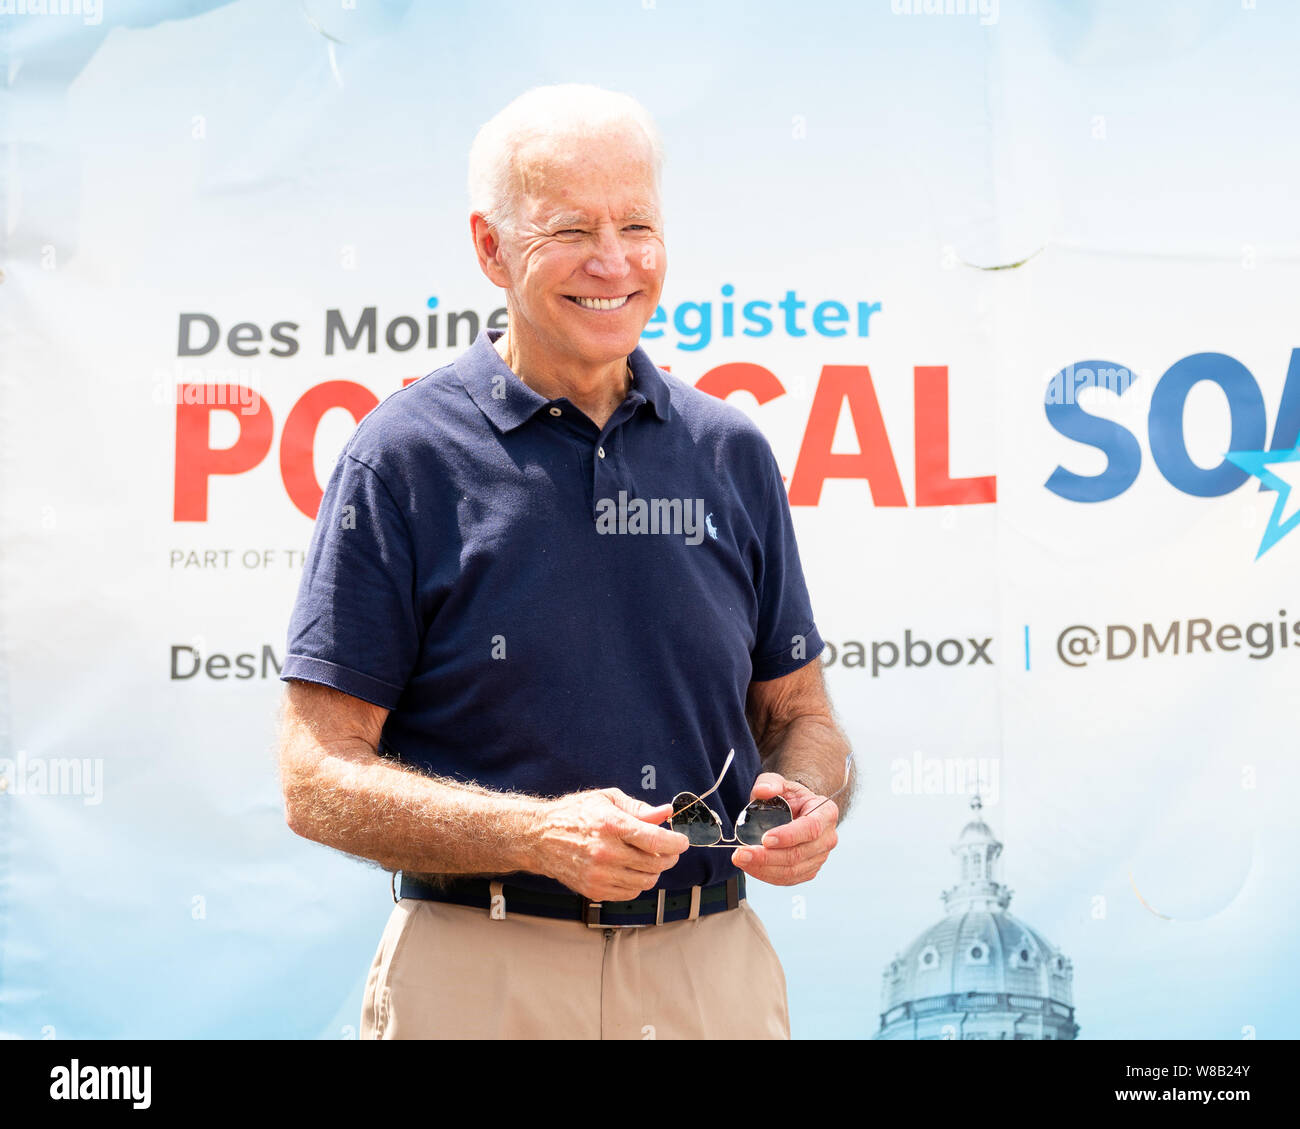 Former Vice President Joe Biden (D) speaking on the Soapbox at the Iowa State Fair in Des Moines, Iowa on August 8, 2019. Stock Photo